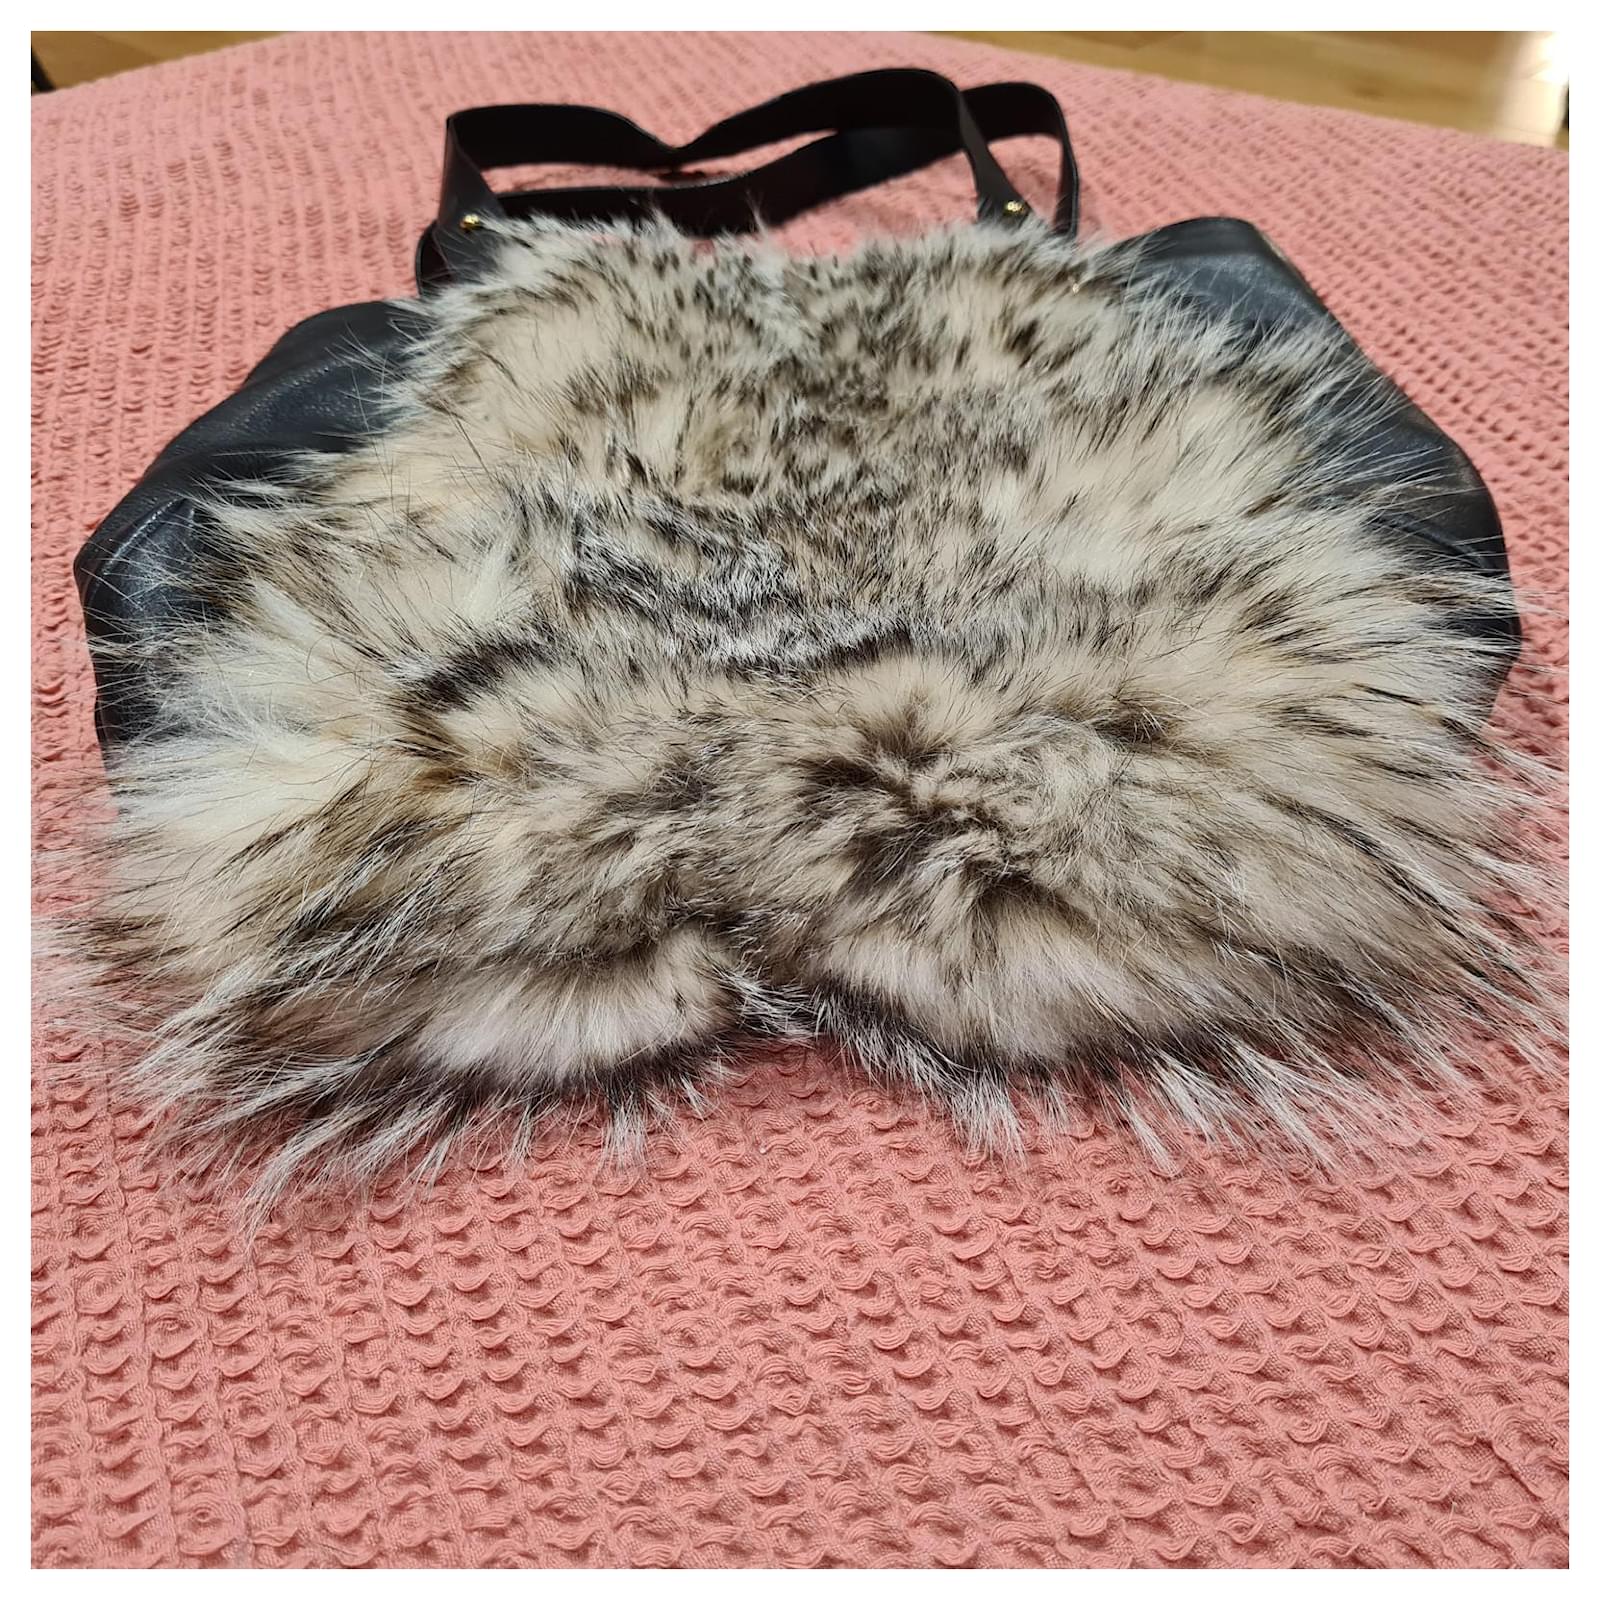 Magnificent and rare Christian Louboutin fur bag Very Black